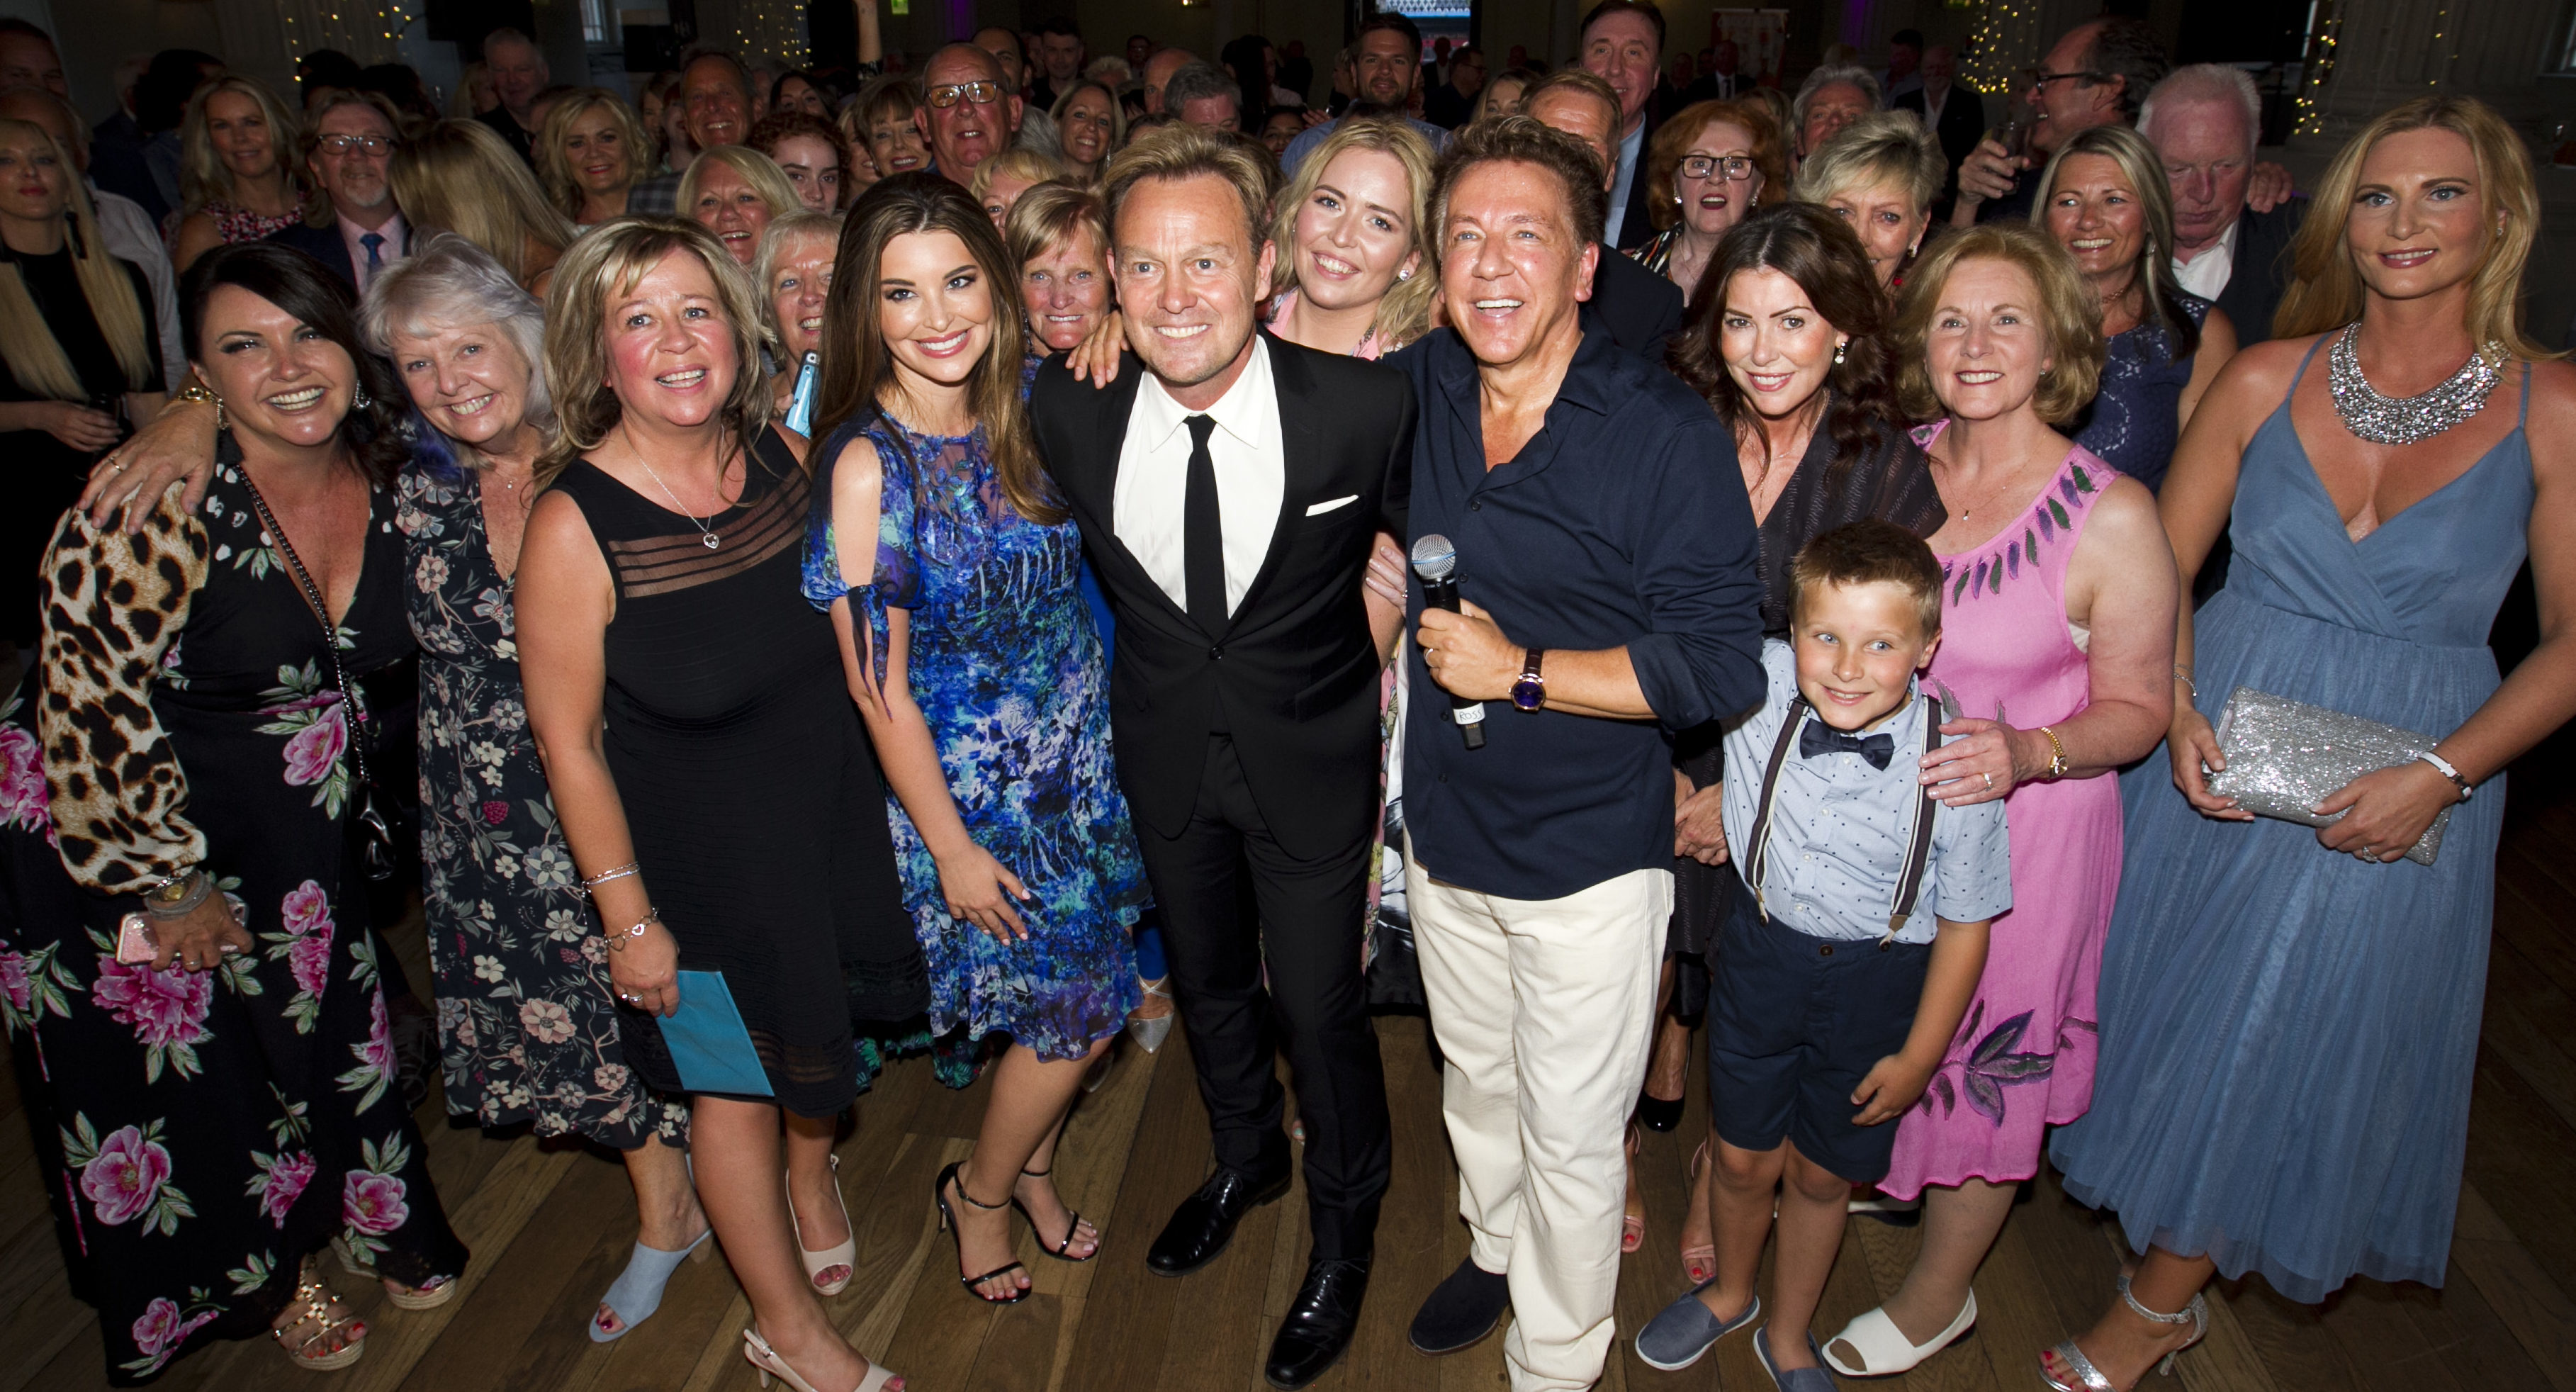 Ross King, celebrating with friends and family after being knighted with an MBE. (Andrew Cawley)